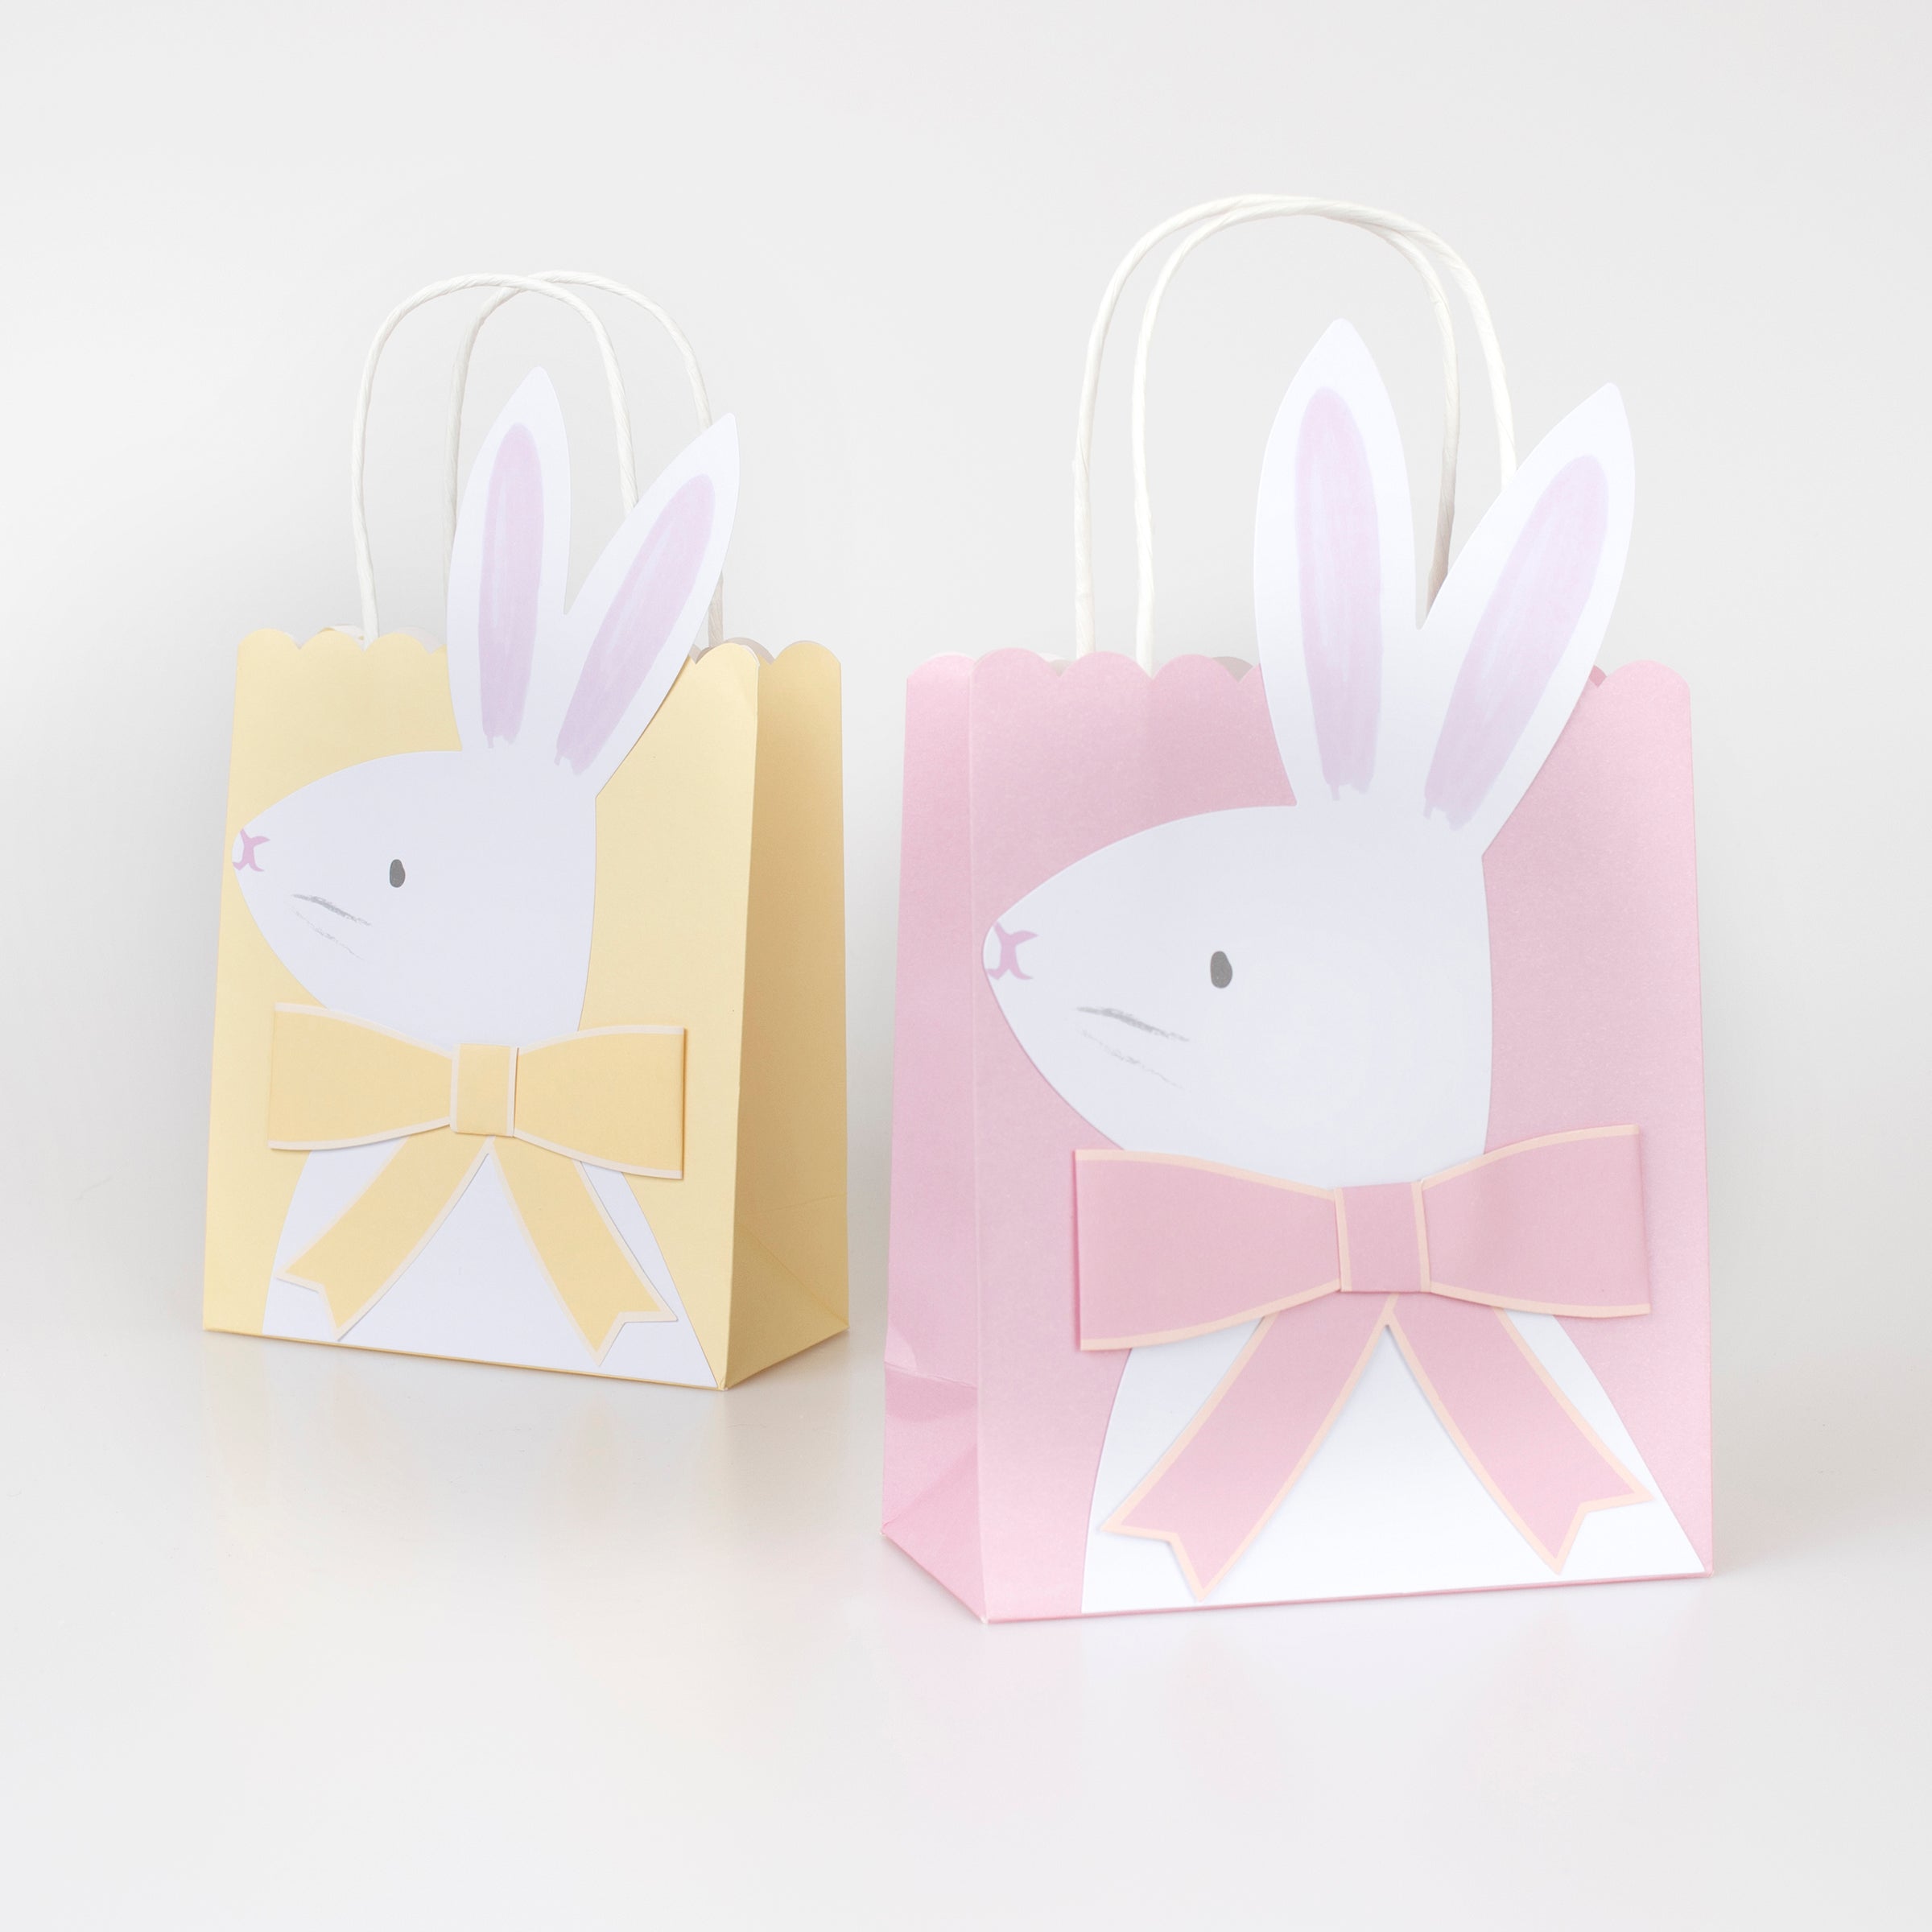 Use our bunny gift bags for an Easter egg hunt or as party bags for Easter.